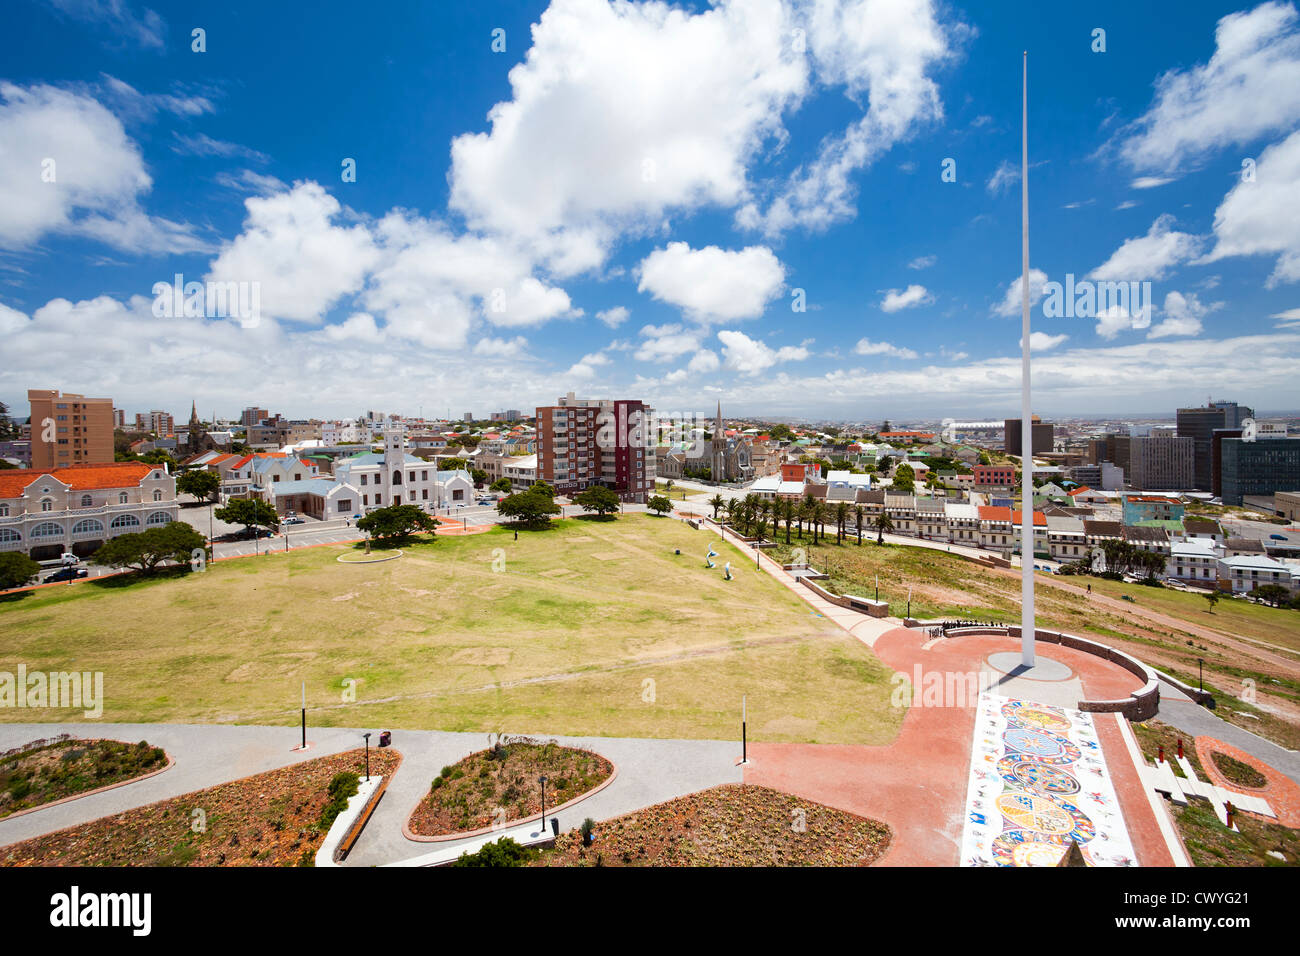 cityscape of PE, South Africa Stock Photo